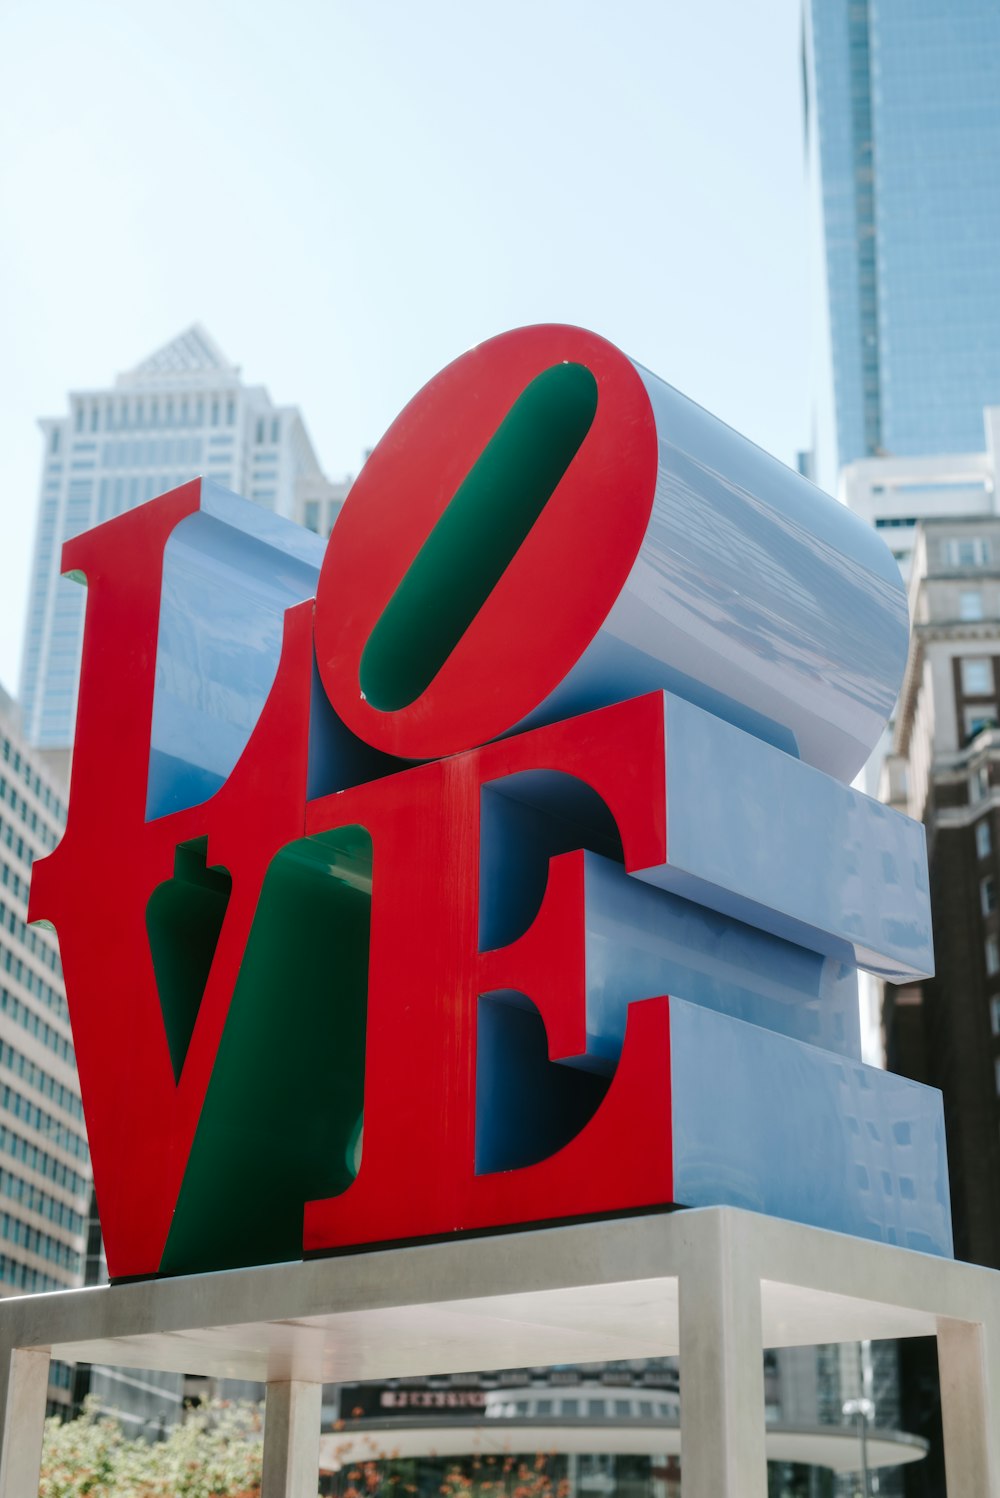 a large love sculpture in the middle of a city